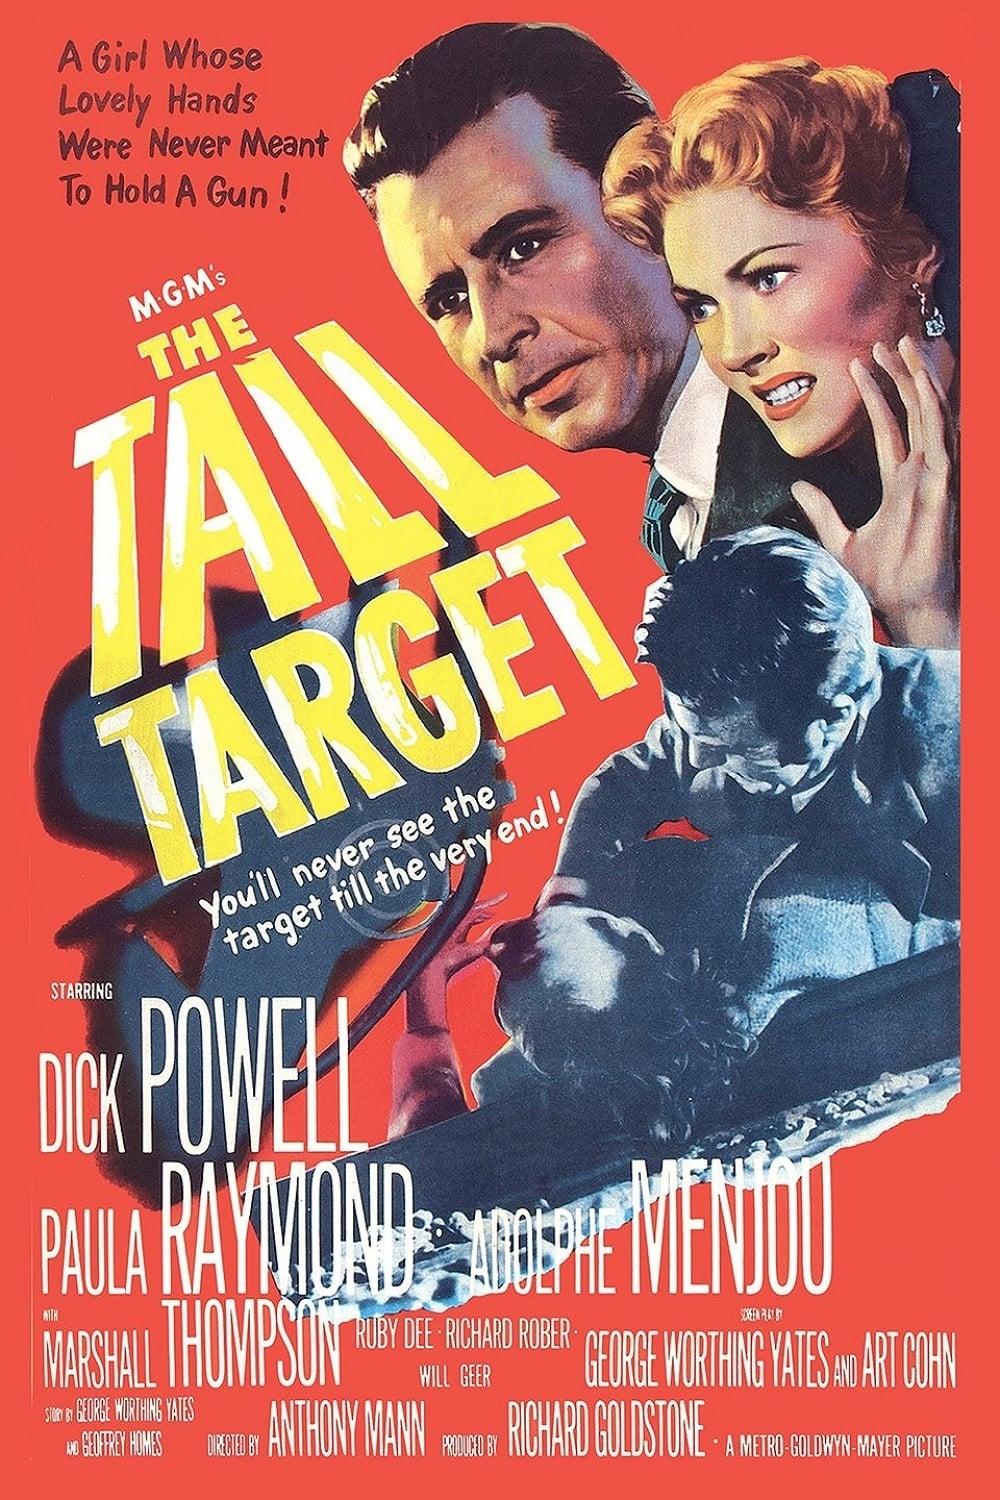 The Tall Target poster